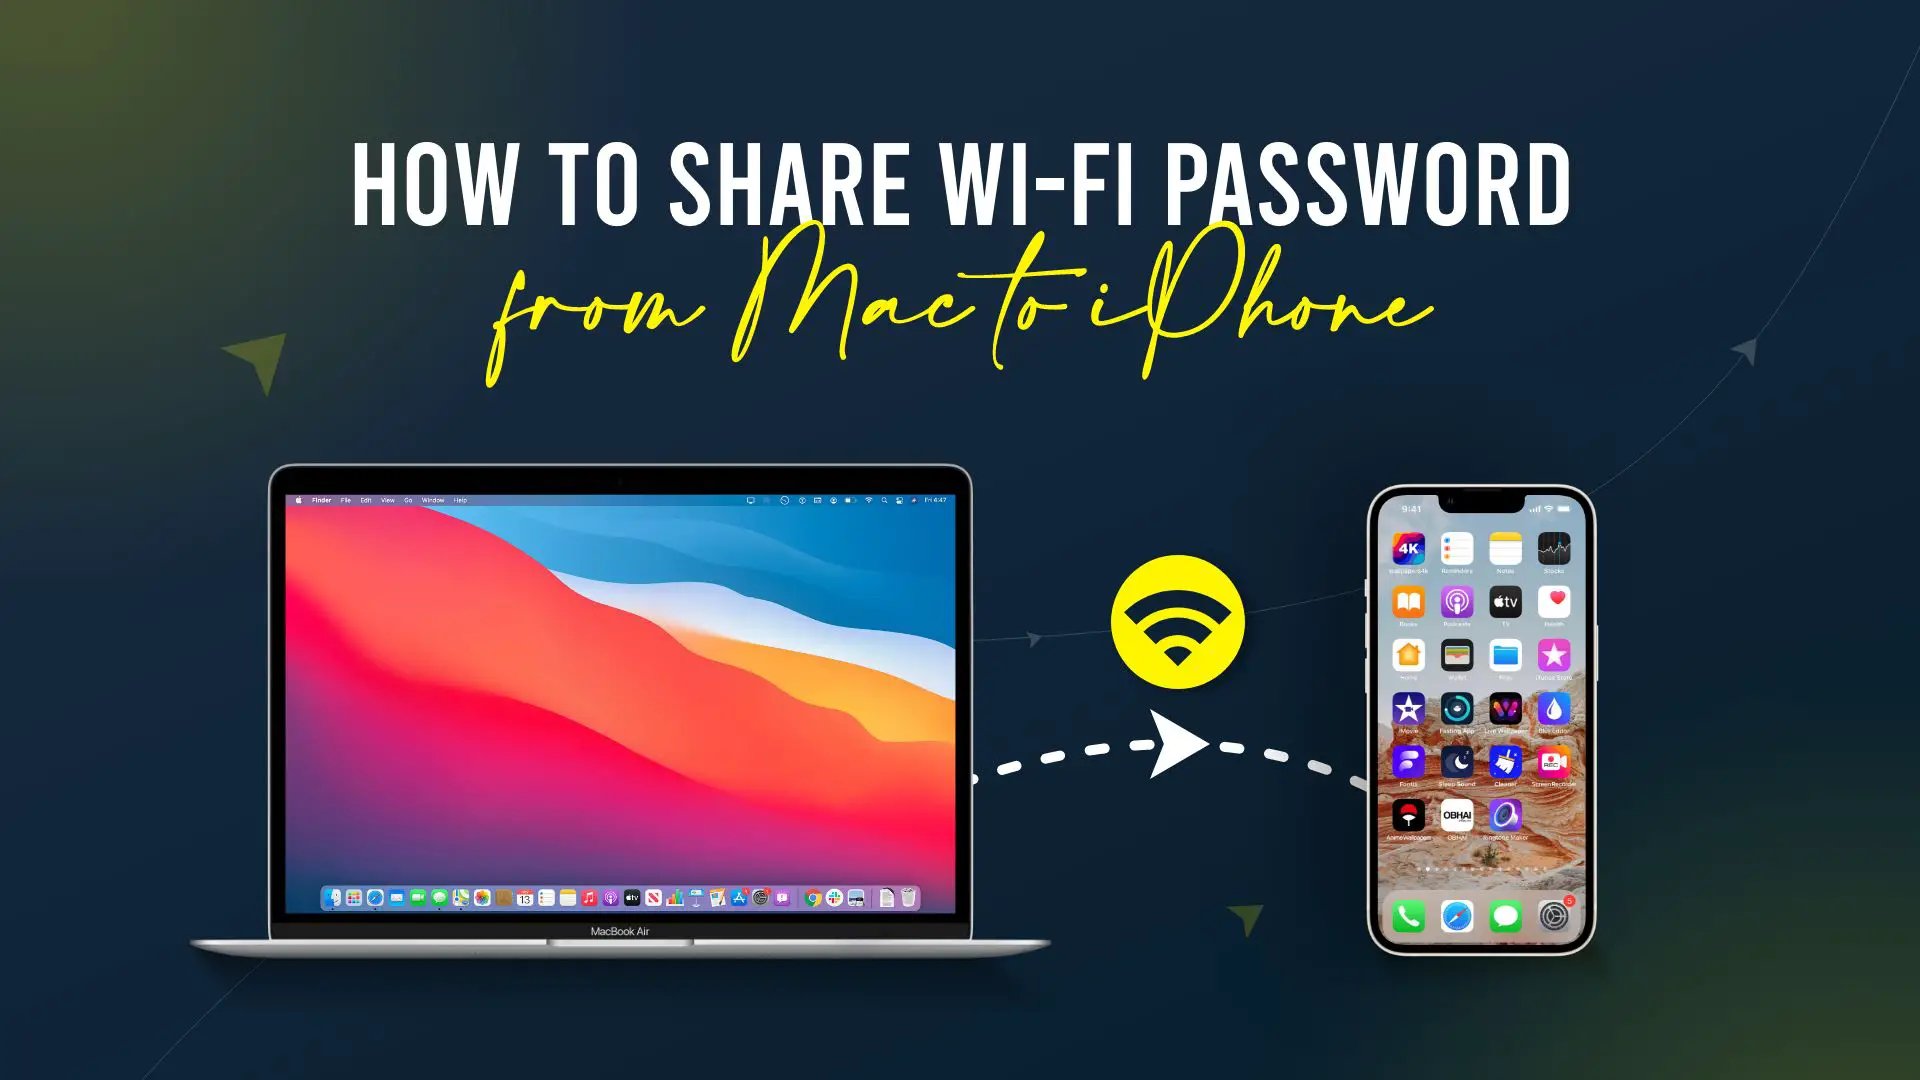 How to Share WiFi Password from Mac to iPhone